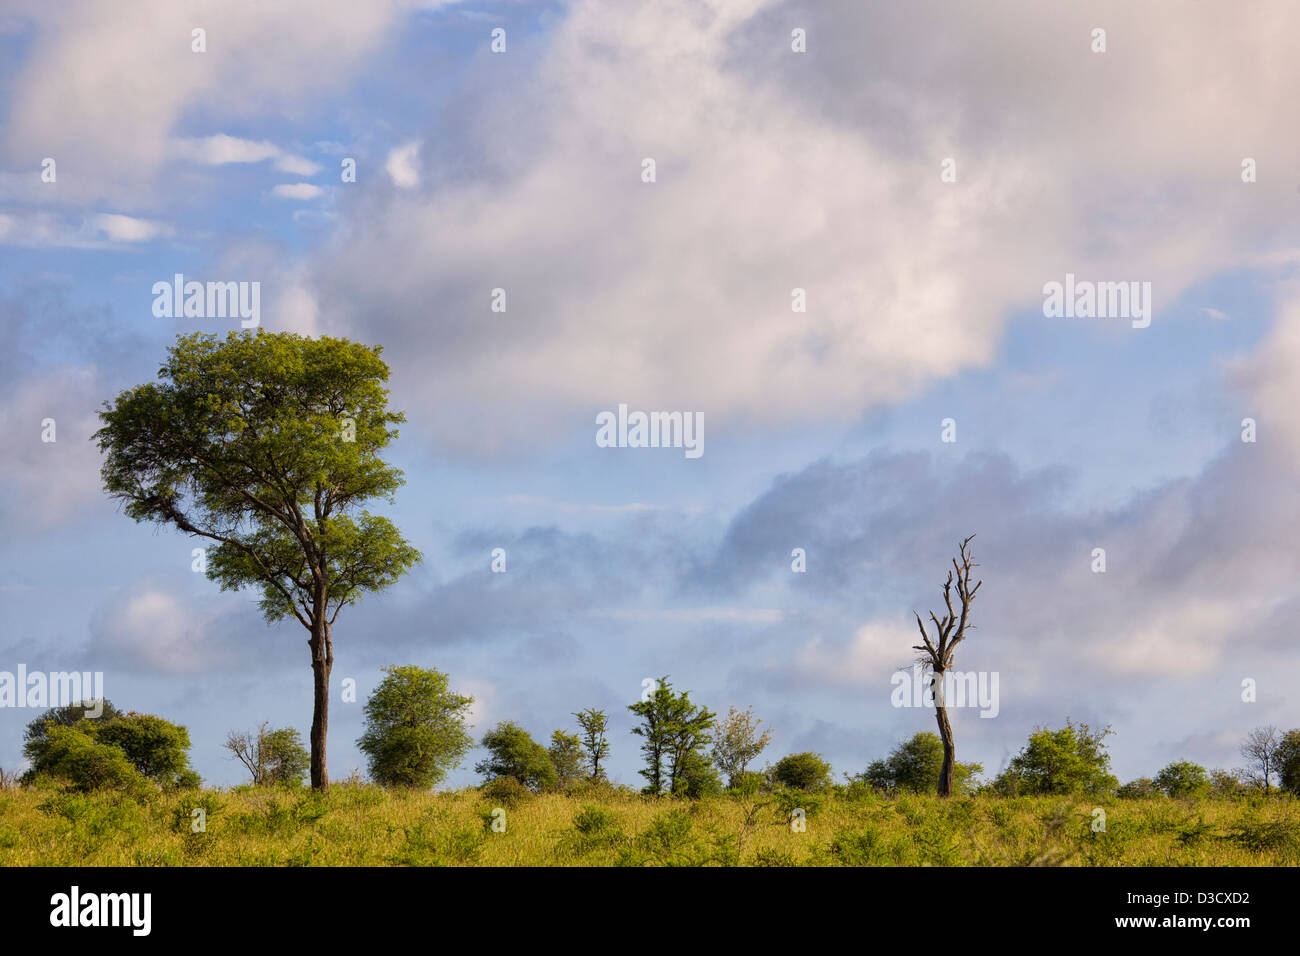 Landscape image of the open plains north of Lower Sabie in the Kruger National Park in South Africa Stock Photo